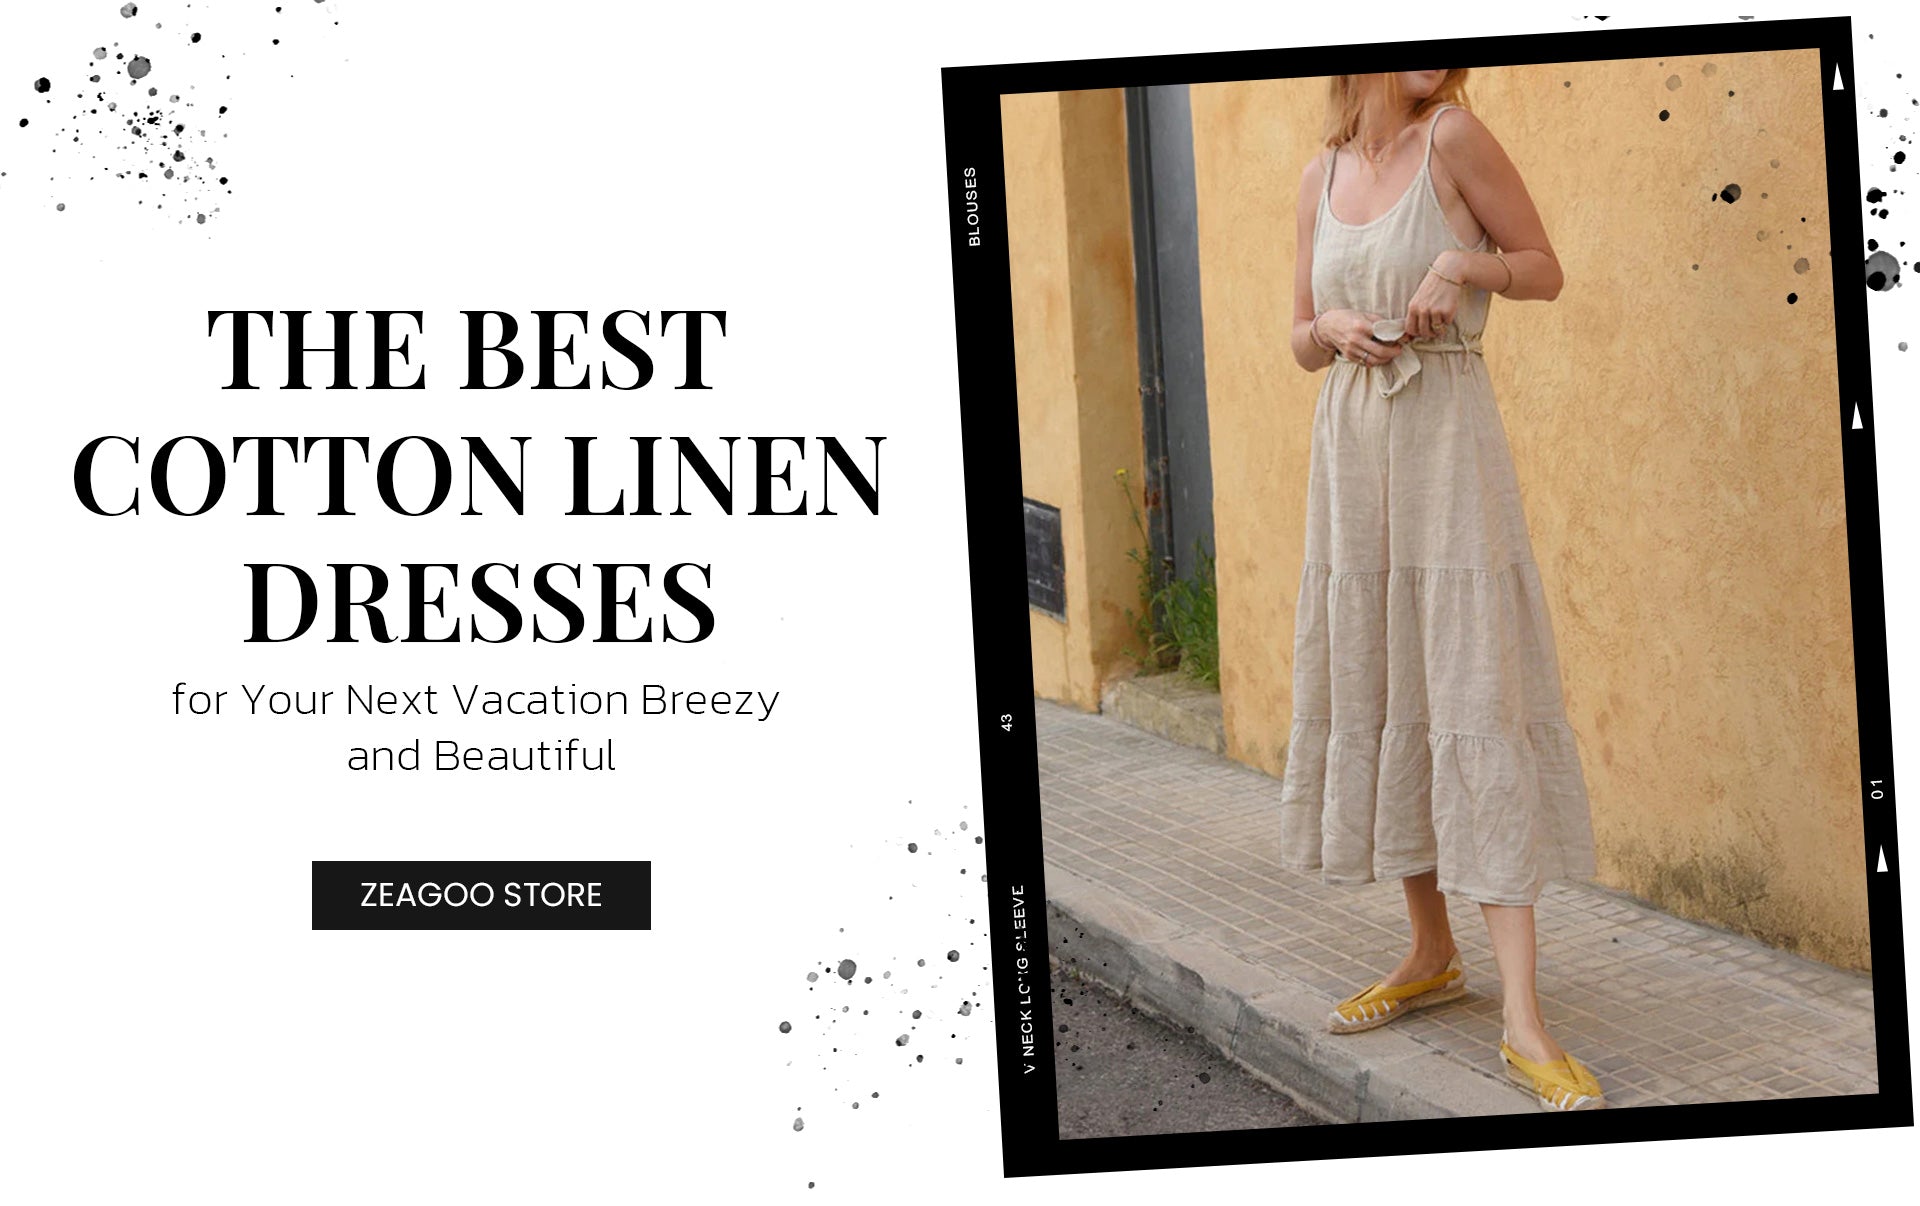 The Best Cotton Linen Dresses for Your Next Vacation Breezy and Beautiful